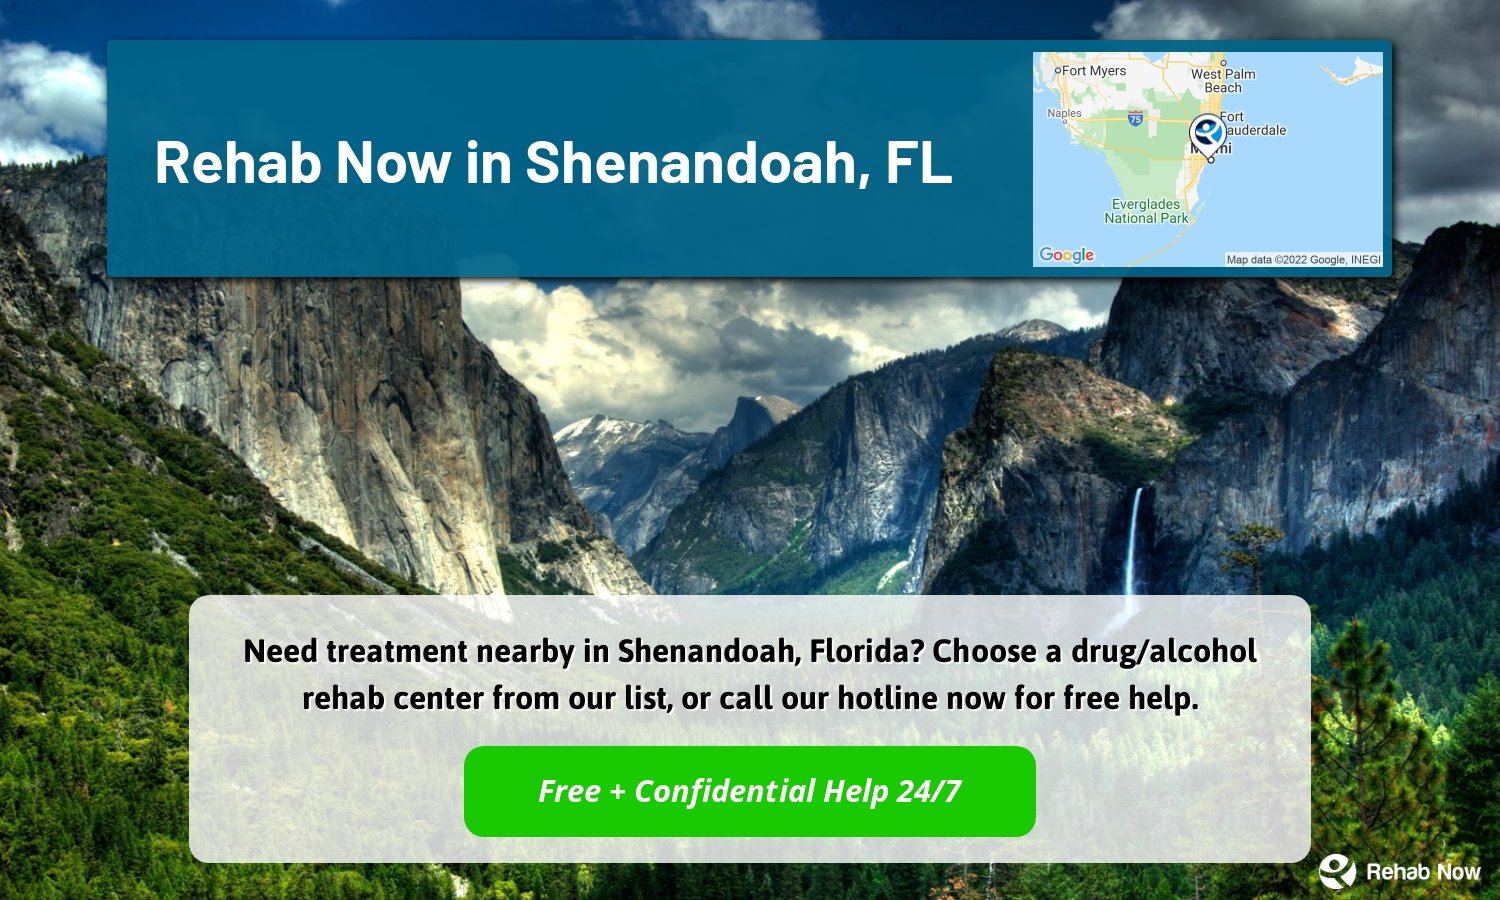 Need treatment nearby in Shenandoah, Florida? Choose a drug/alcohol rehab center from our list, or call our hotline now for free help.